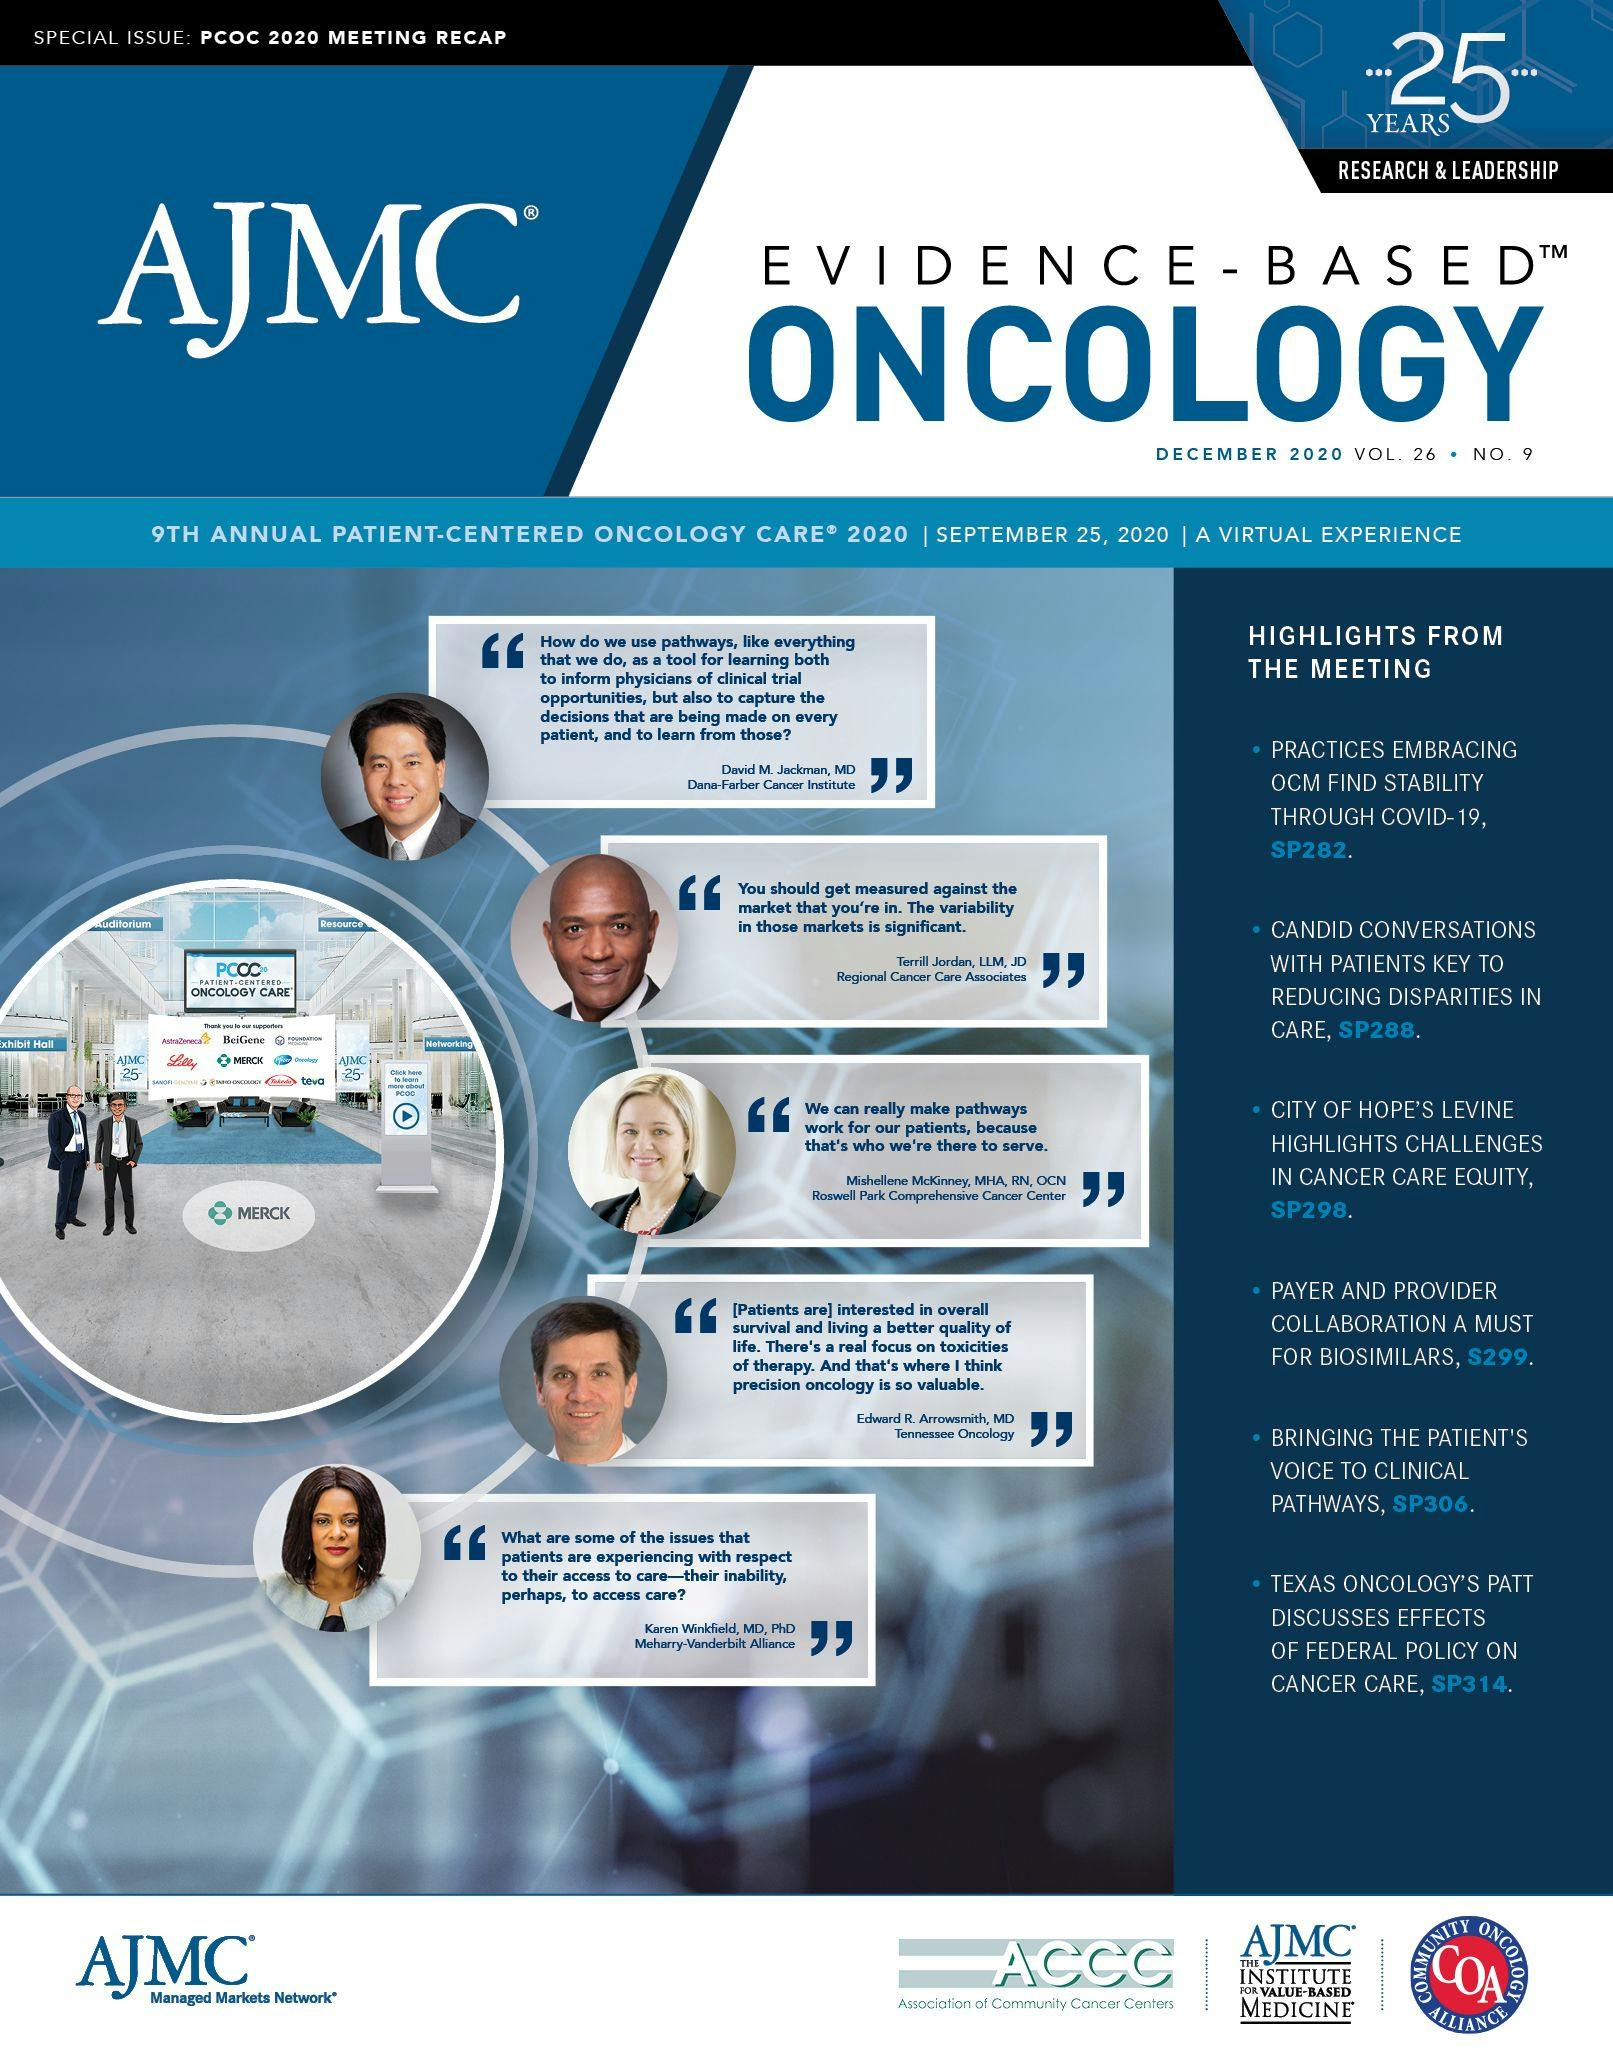 Patient-Centered Oncology Care 2020